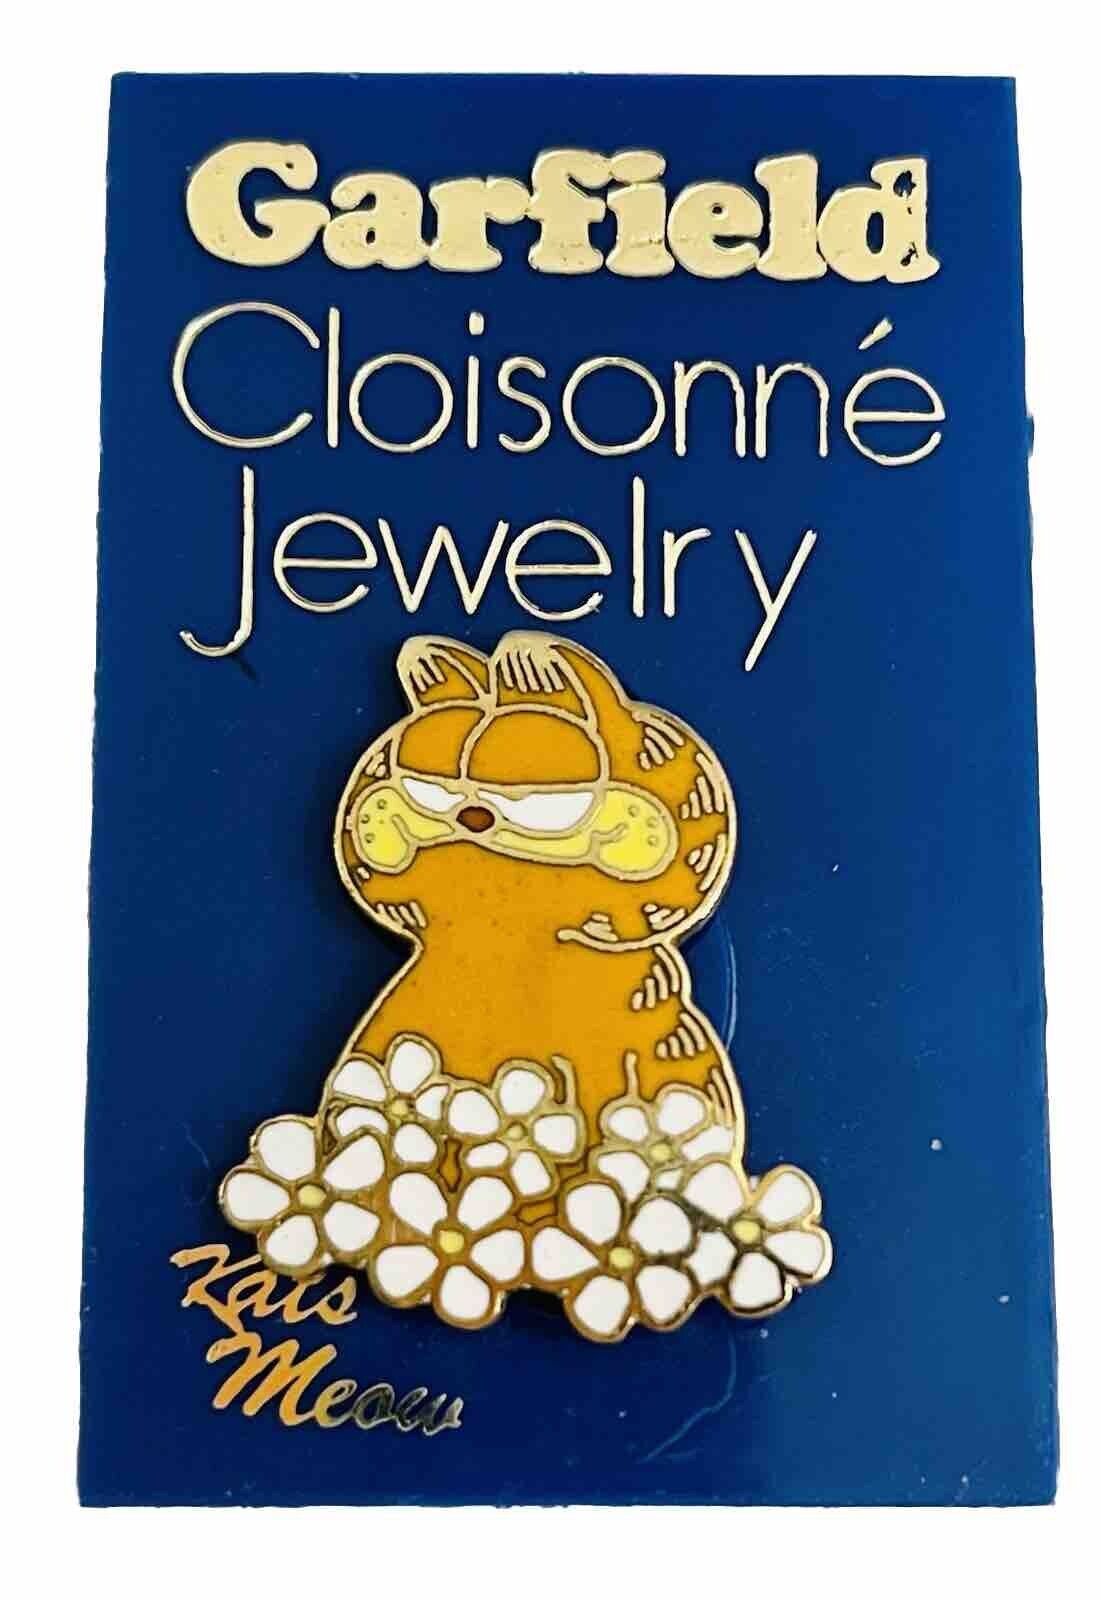 New on Card 1978 Garfield Cloisonné Jewelry Kats Meow Garfield with Flowers Pin